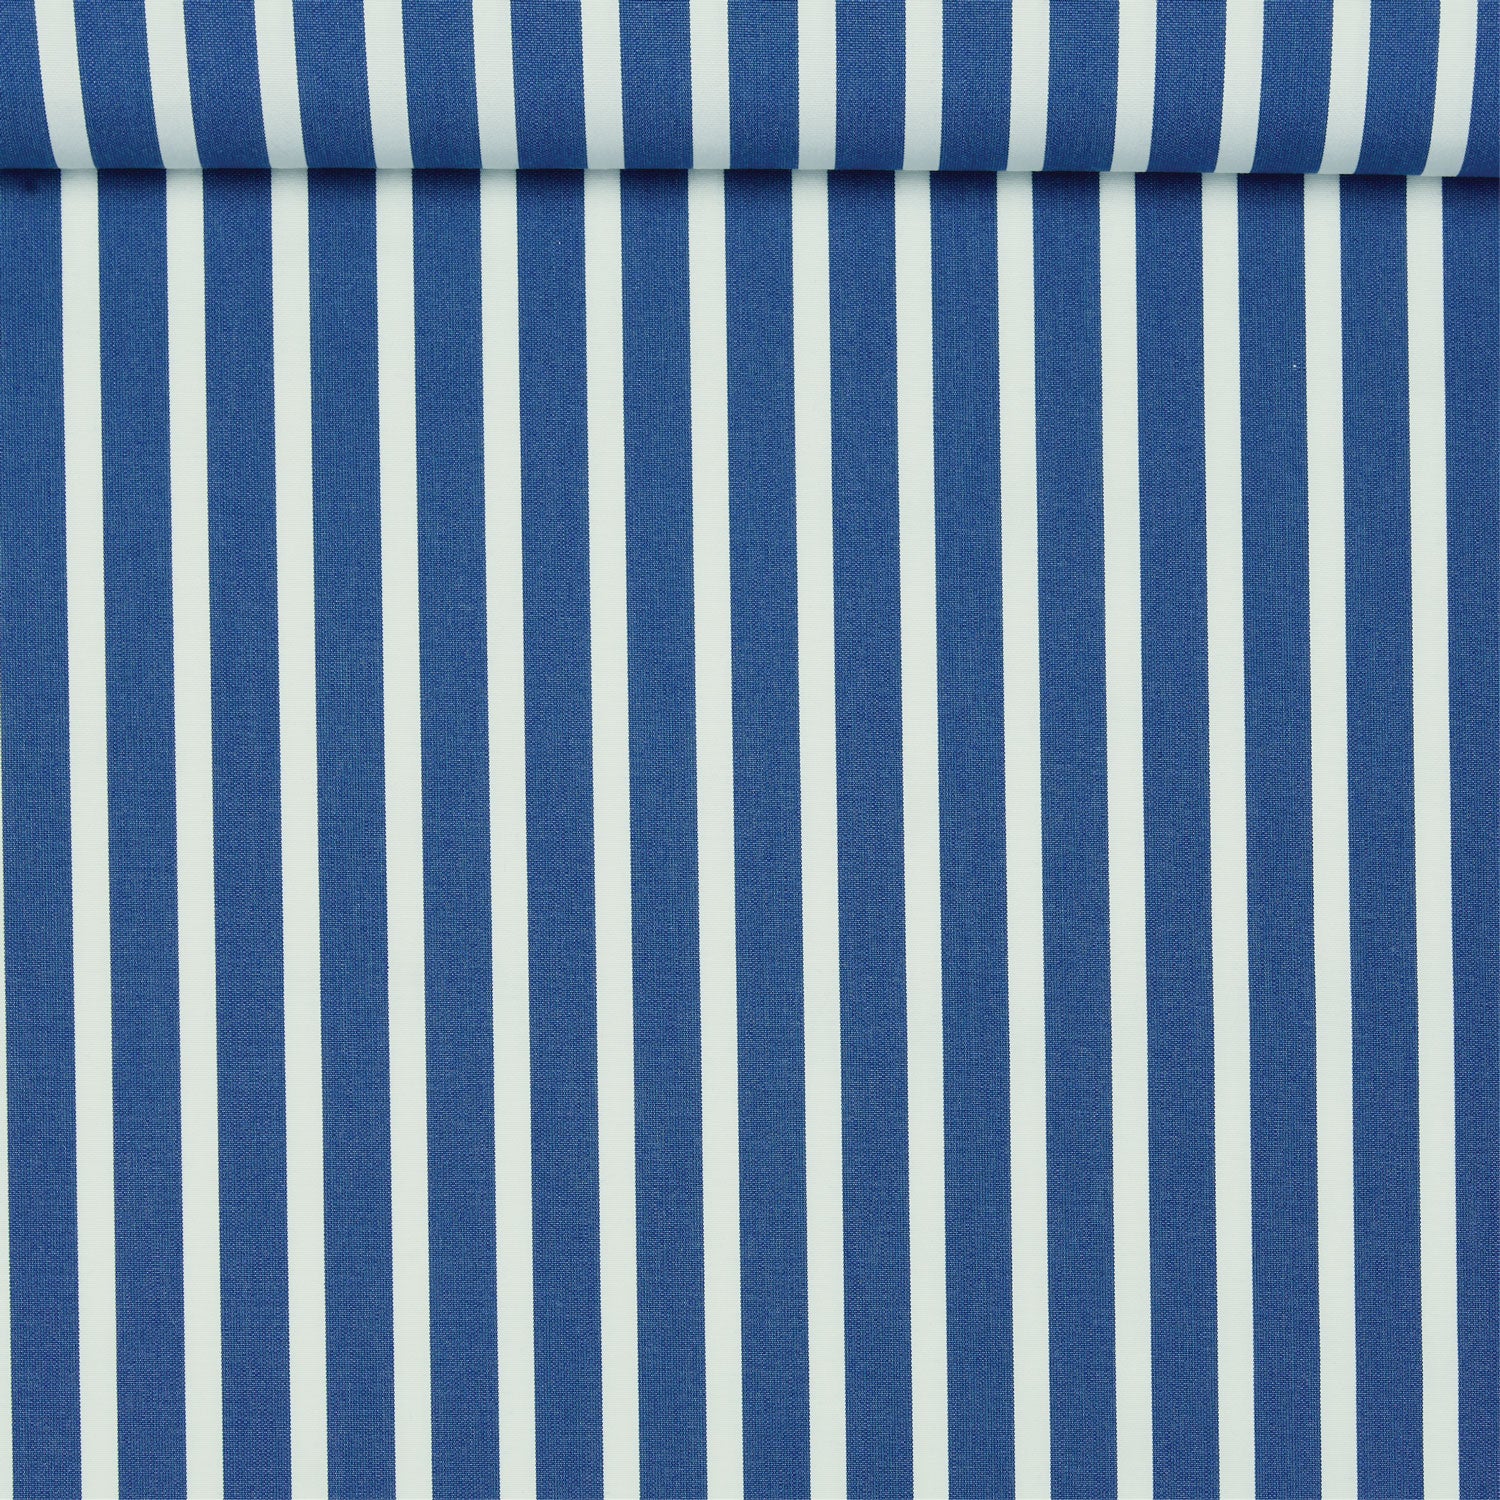 A birds eye view of a jacquard woven blue and white striped pattern outdoor performance fabric roll. 